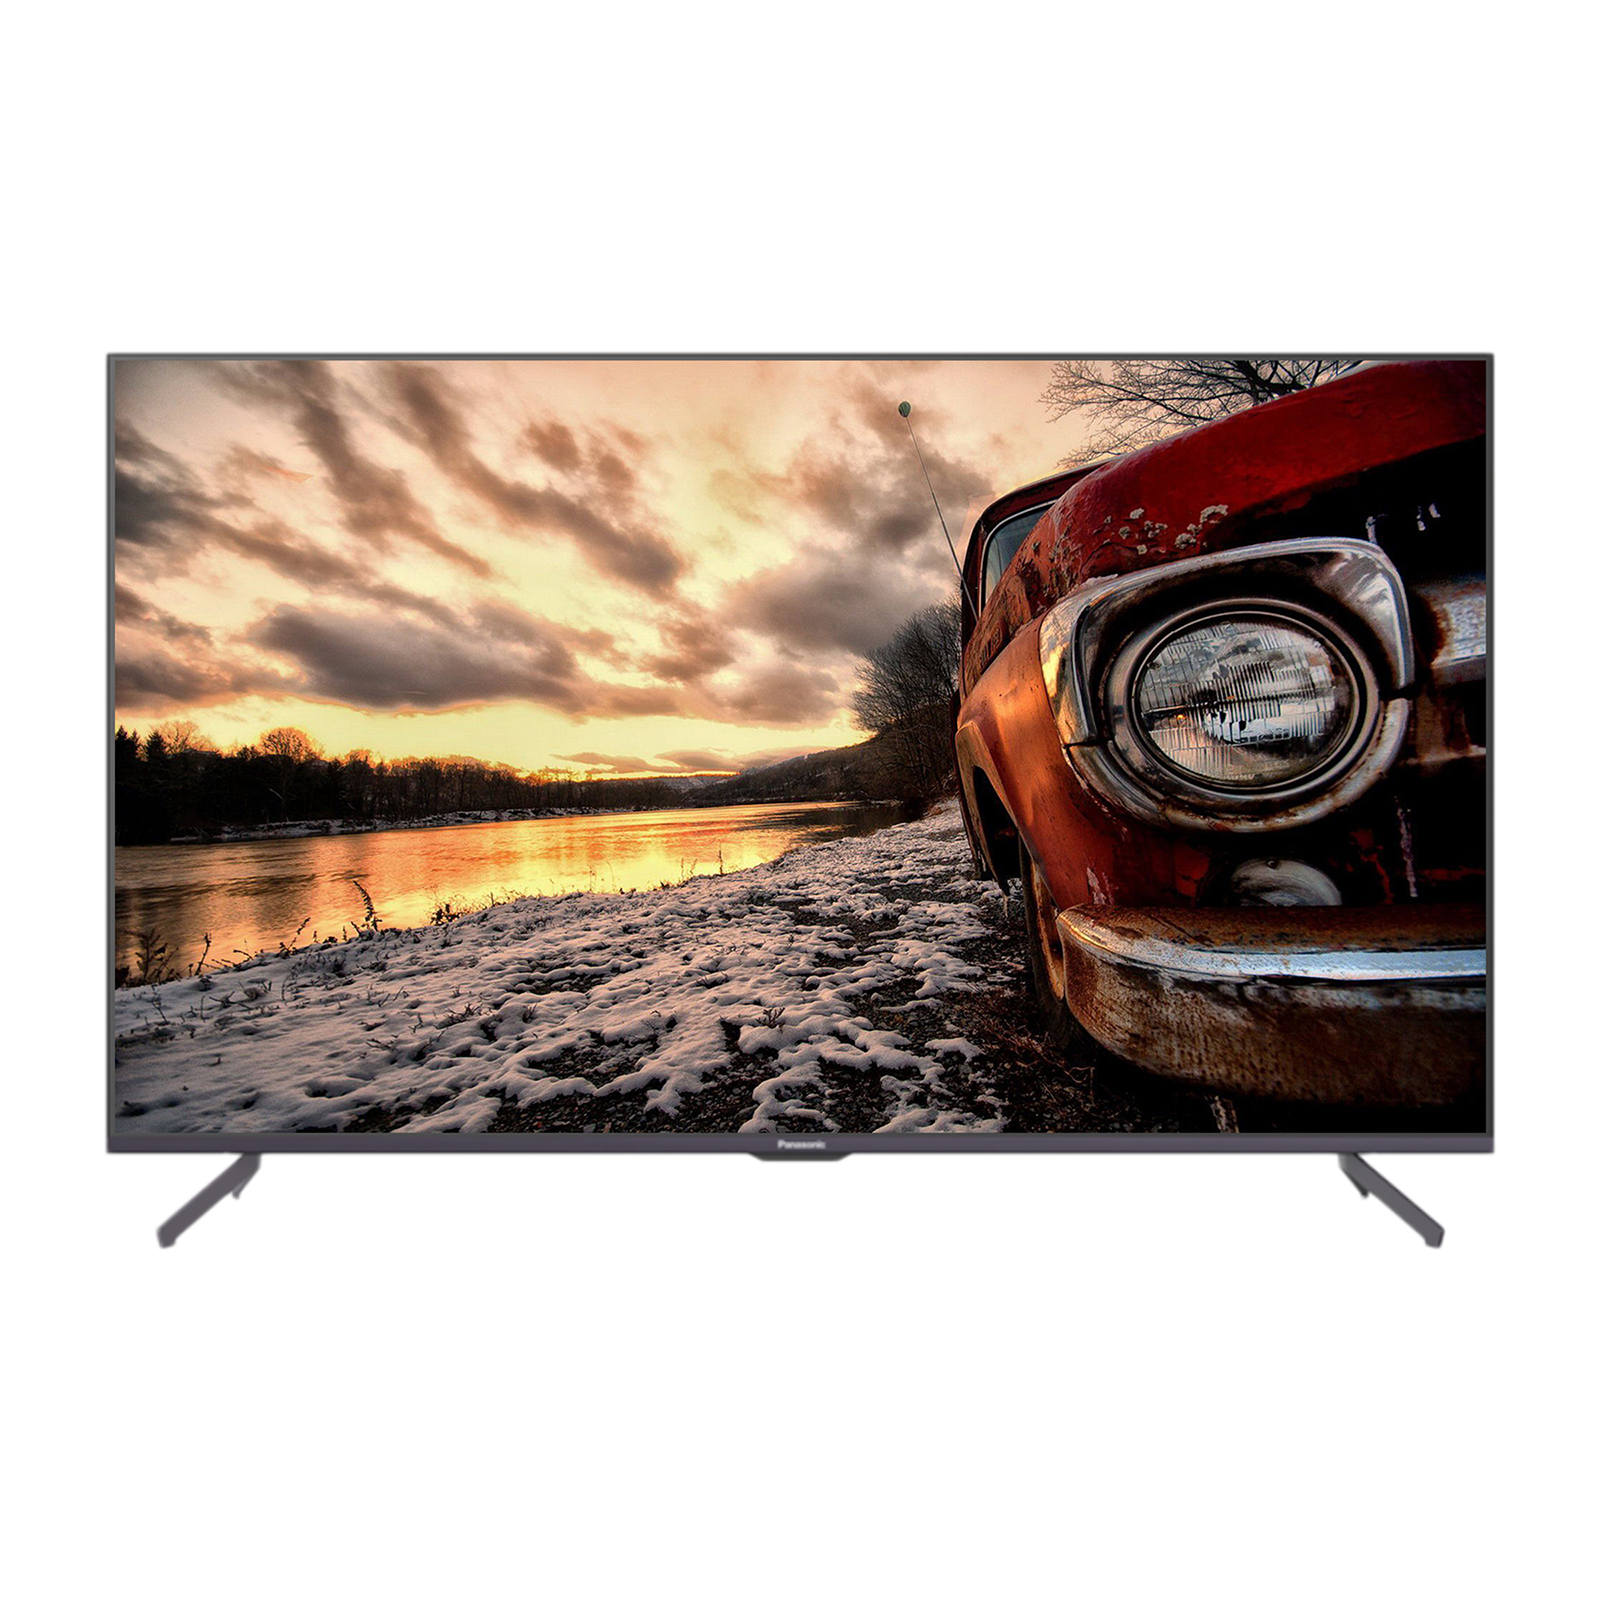 Panasonic LX 139 cm (55 inch) 4K Ultra HD LED Android TV with Alexa Compatibility